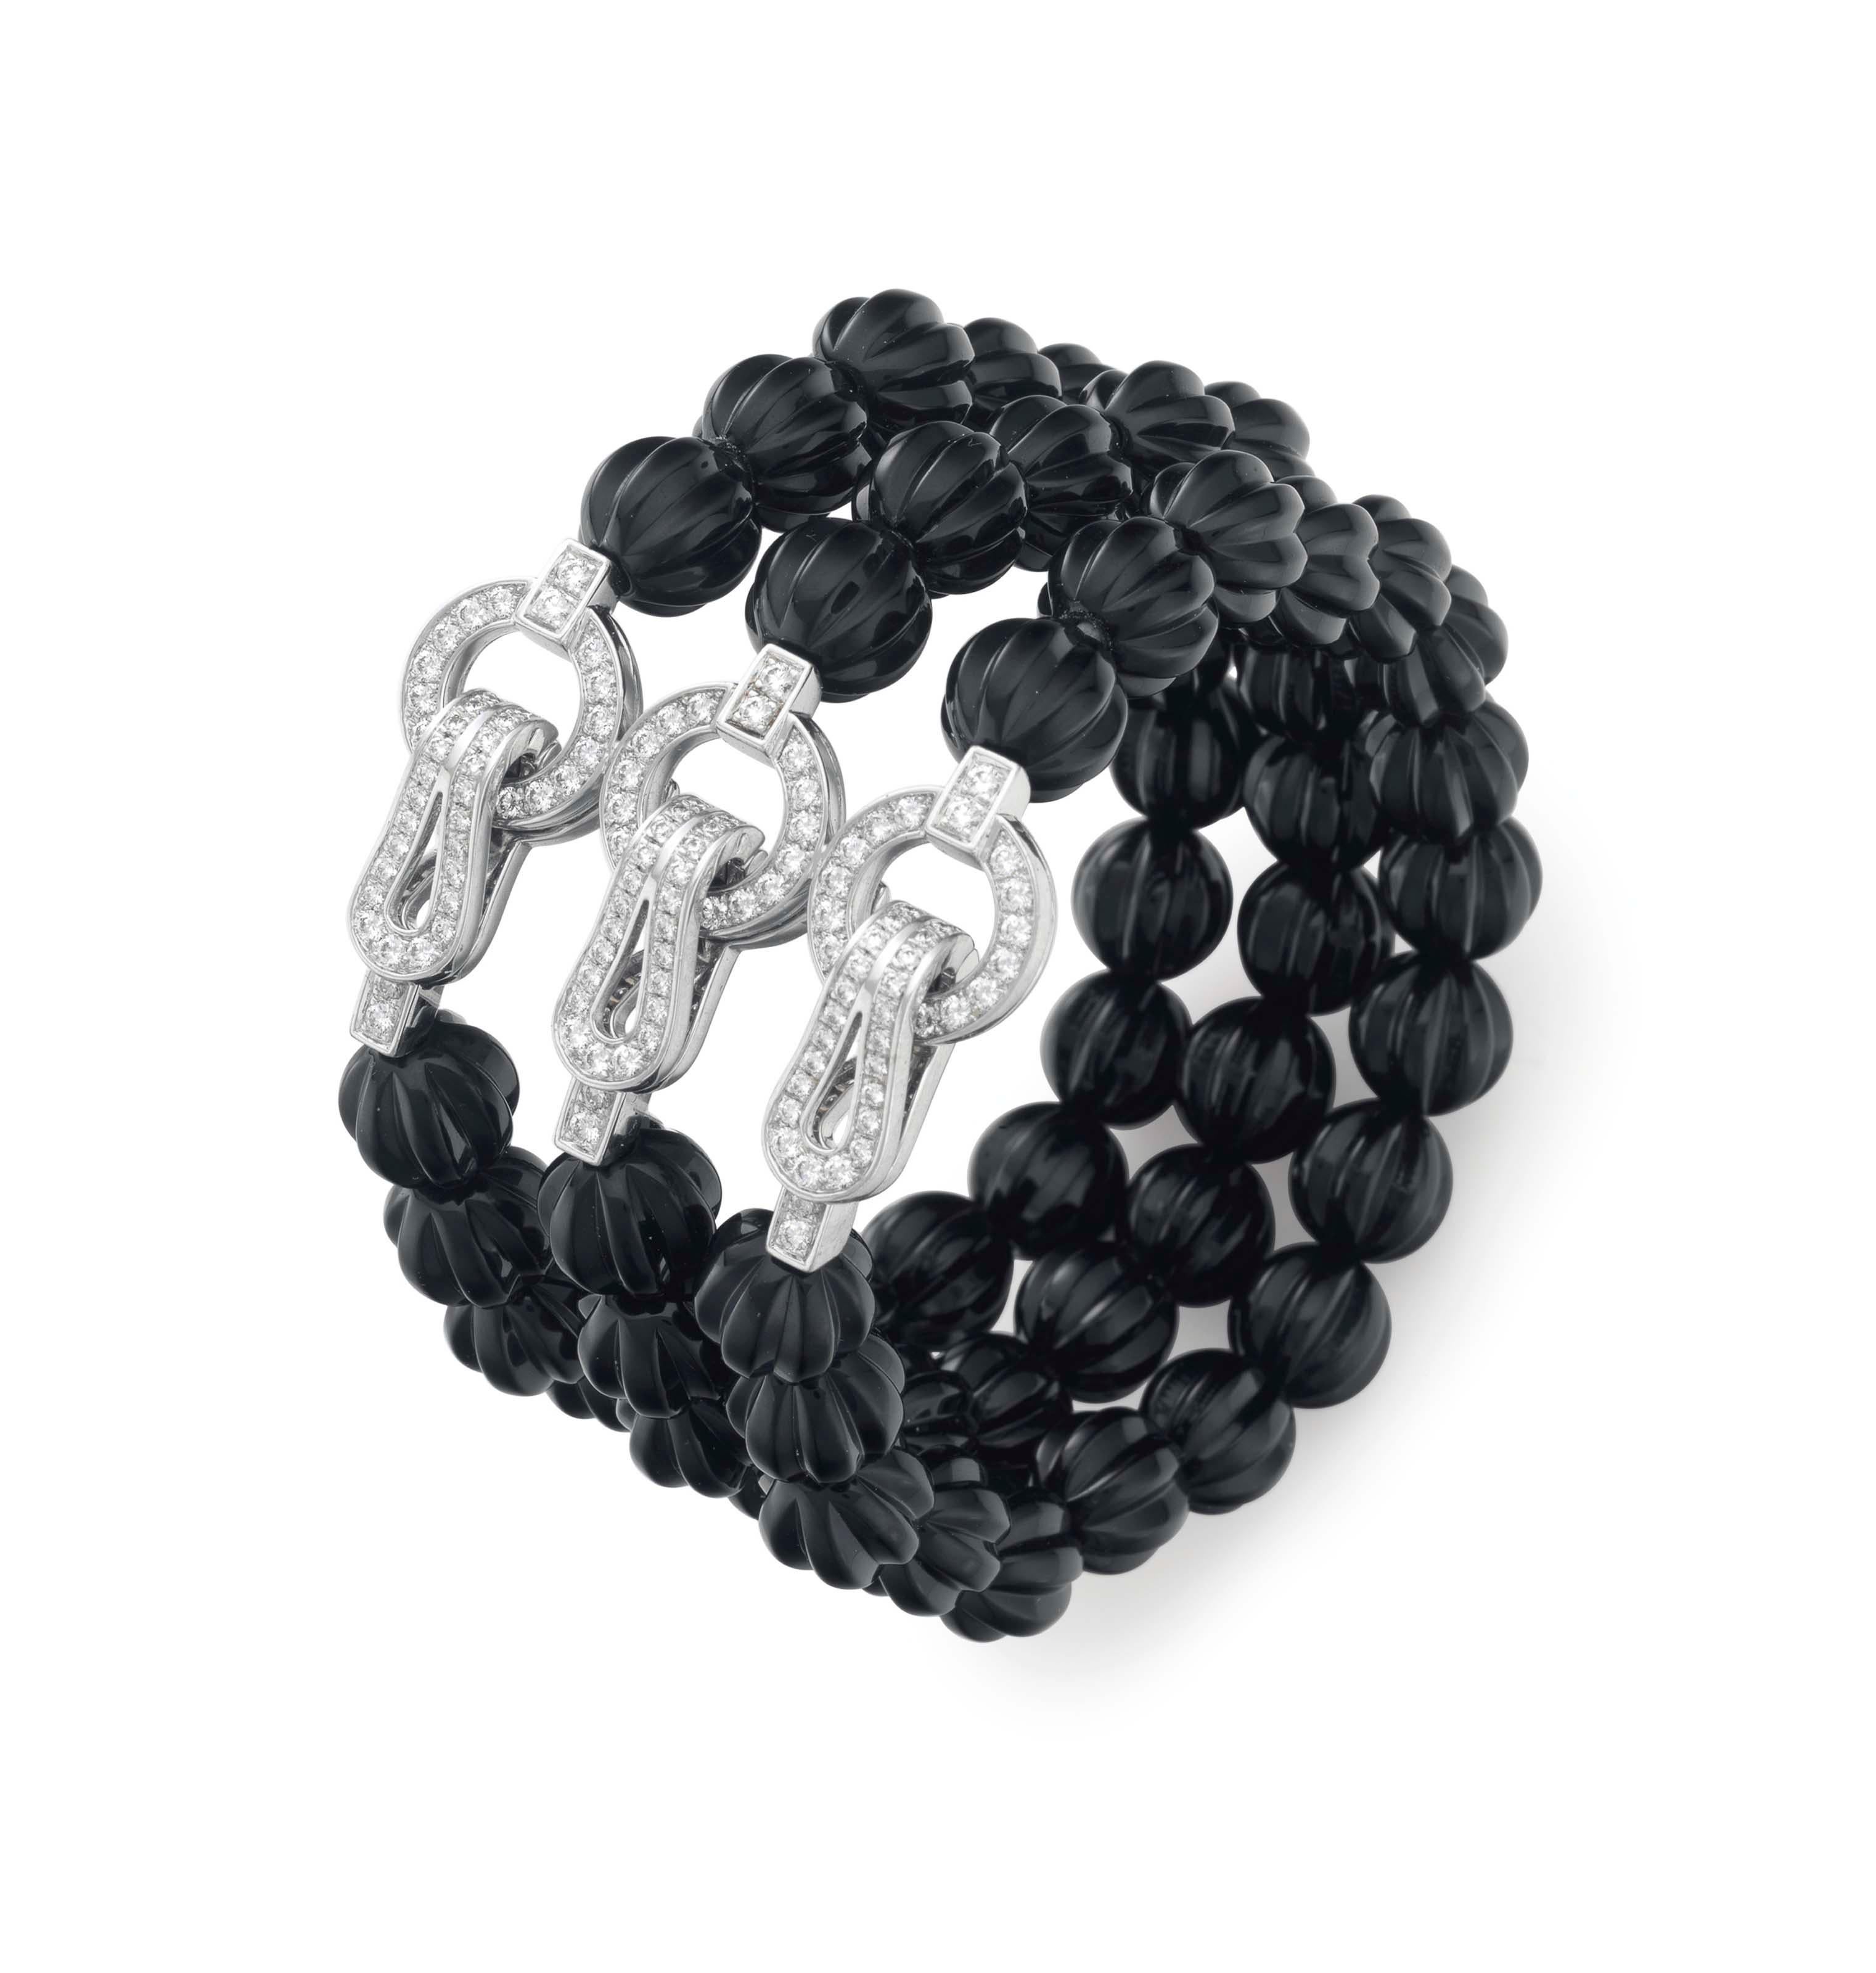 A magnificent bracelet by Cartier designed as three rows of carved onyx beads, joined by three round brilliant cut diamond stylized buckle hook clasps. The bracelet has french hallmarks, Cartier signature, and Cartier serial number.

Cartier Retail